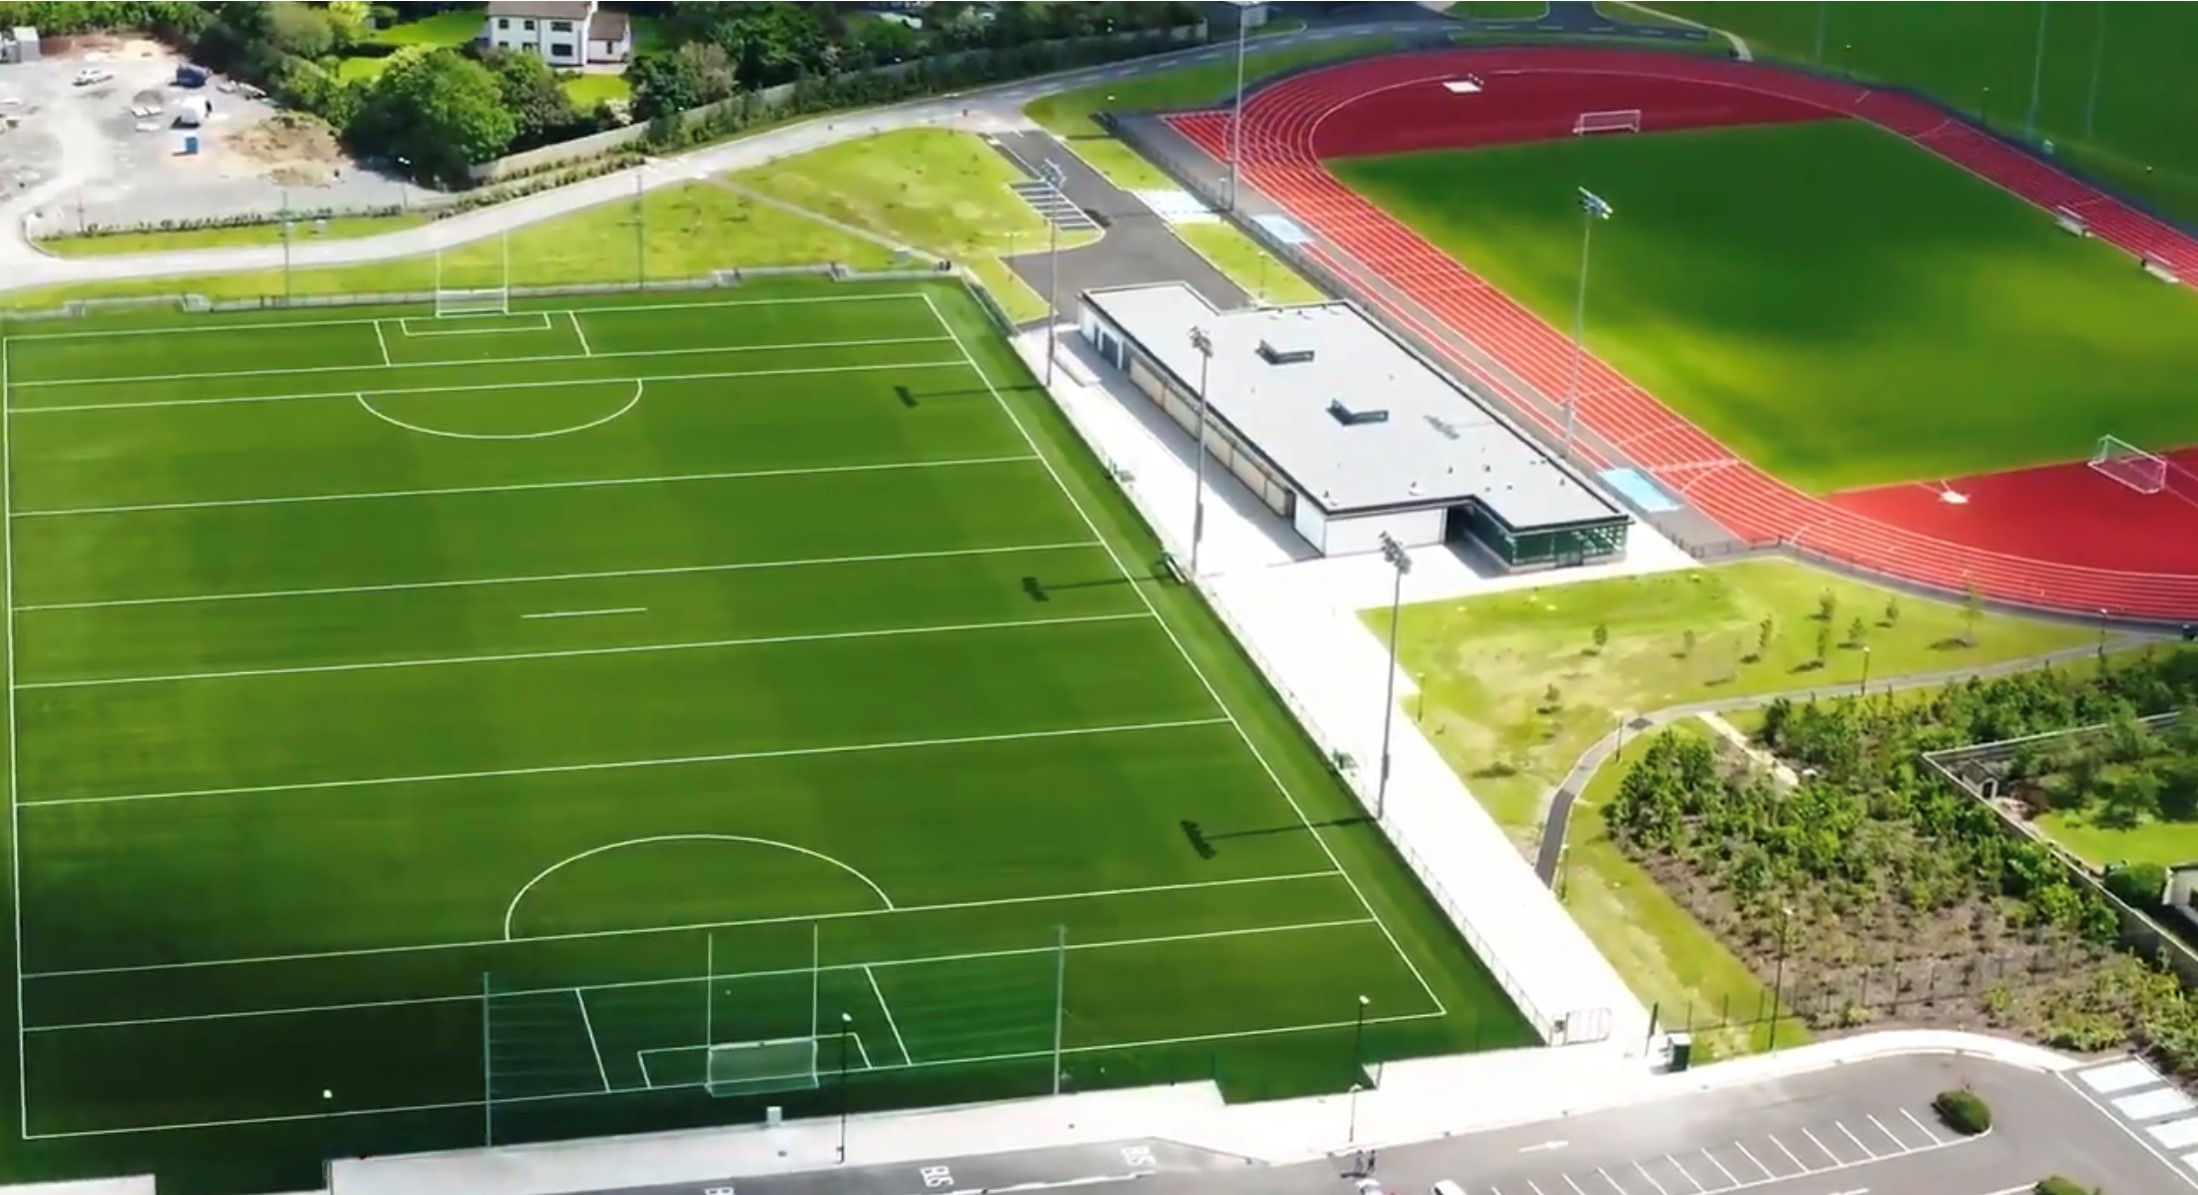 October 2021: IT Carlow South Sports Campus handed over